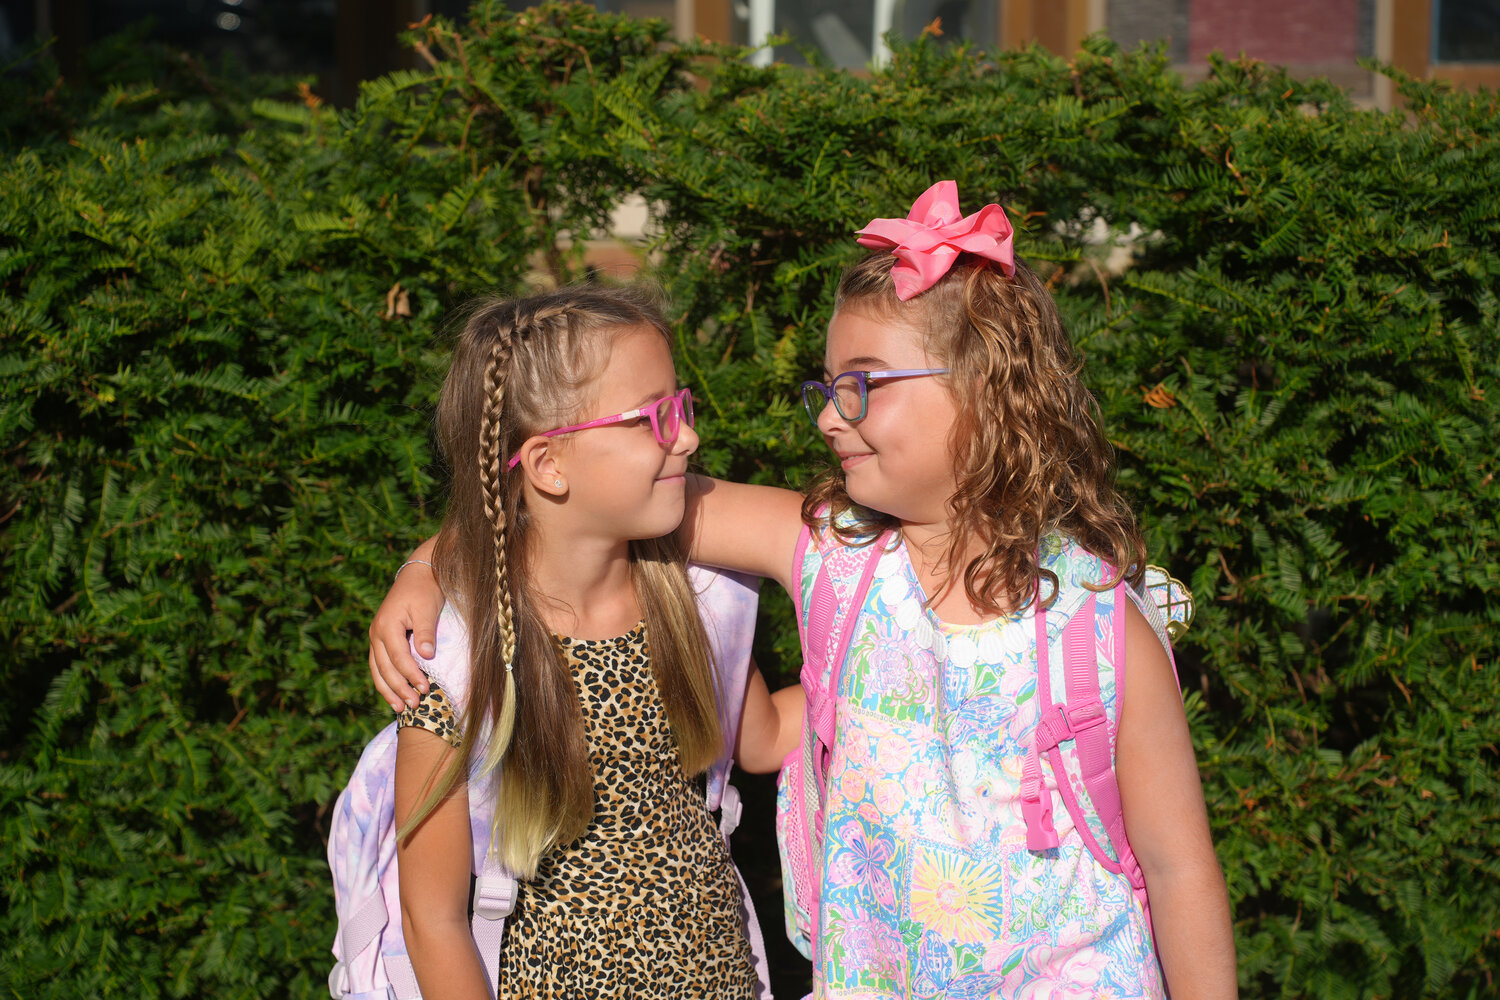 Kaylee Tagnosky and Quinn Mattone are excited to return to William S. Covert Elementary for the start of 2nd grade.